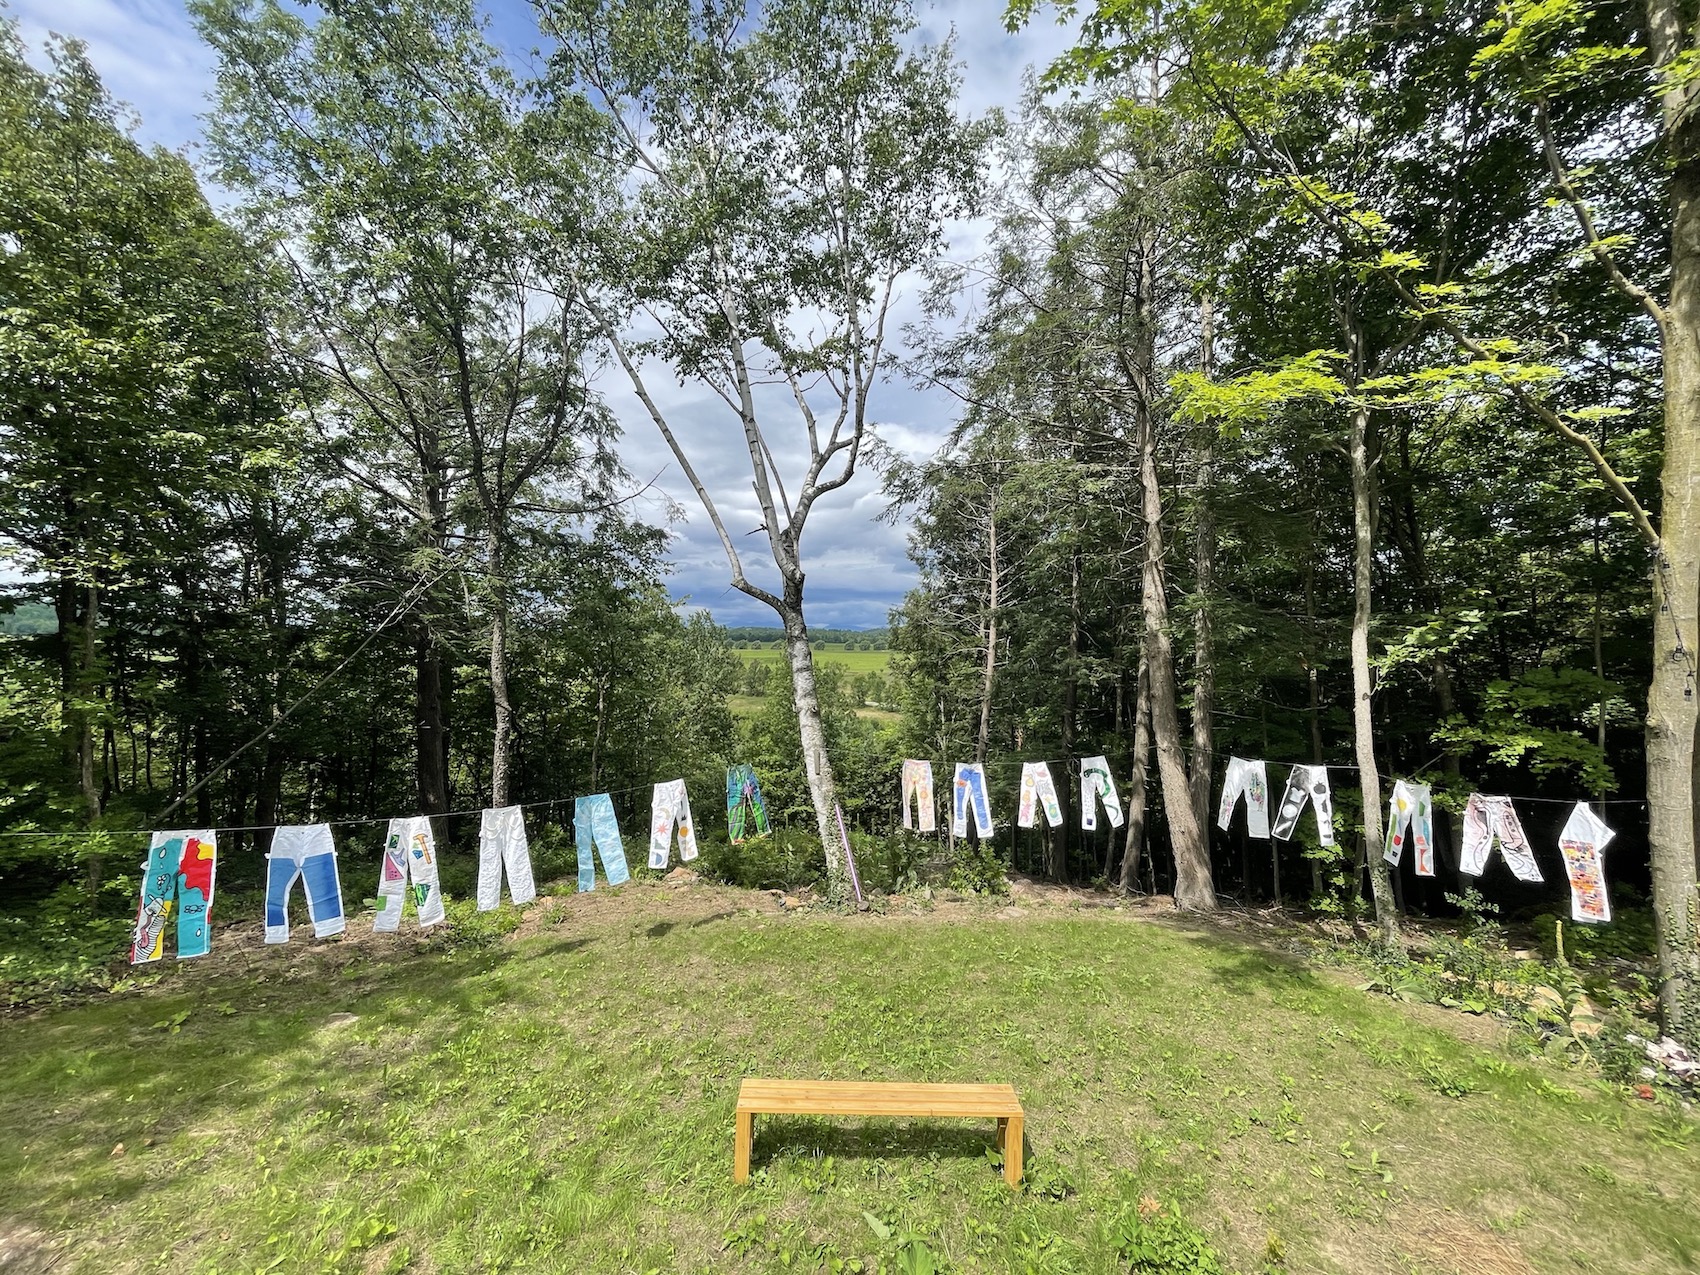 pants decorated individually hanging from long clothesline, with mountain/forrest background